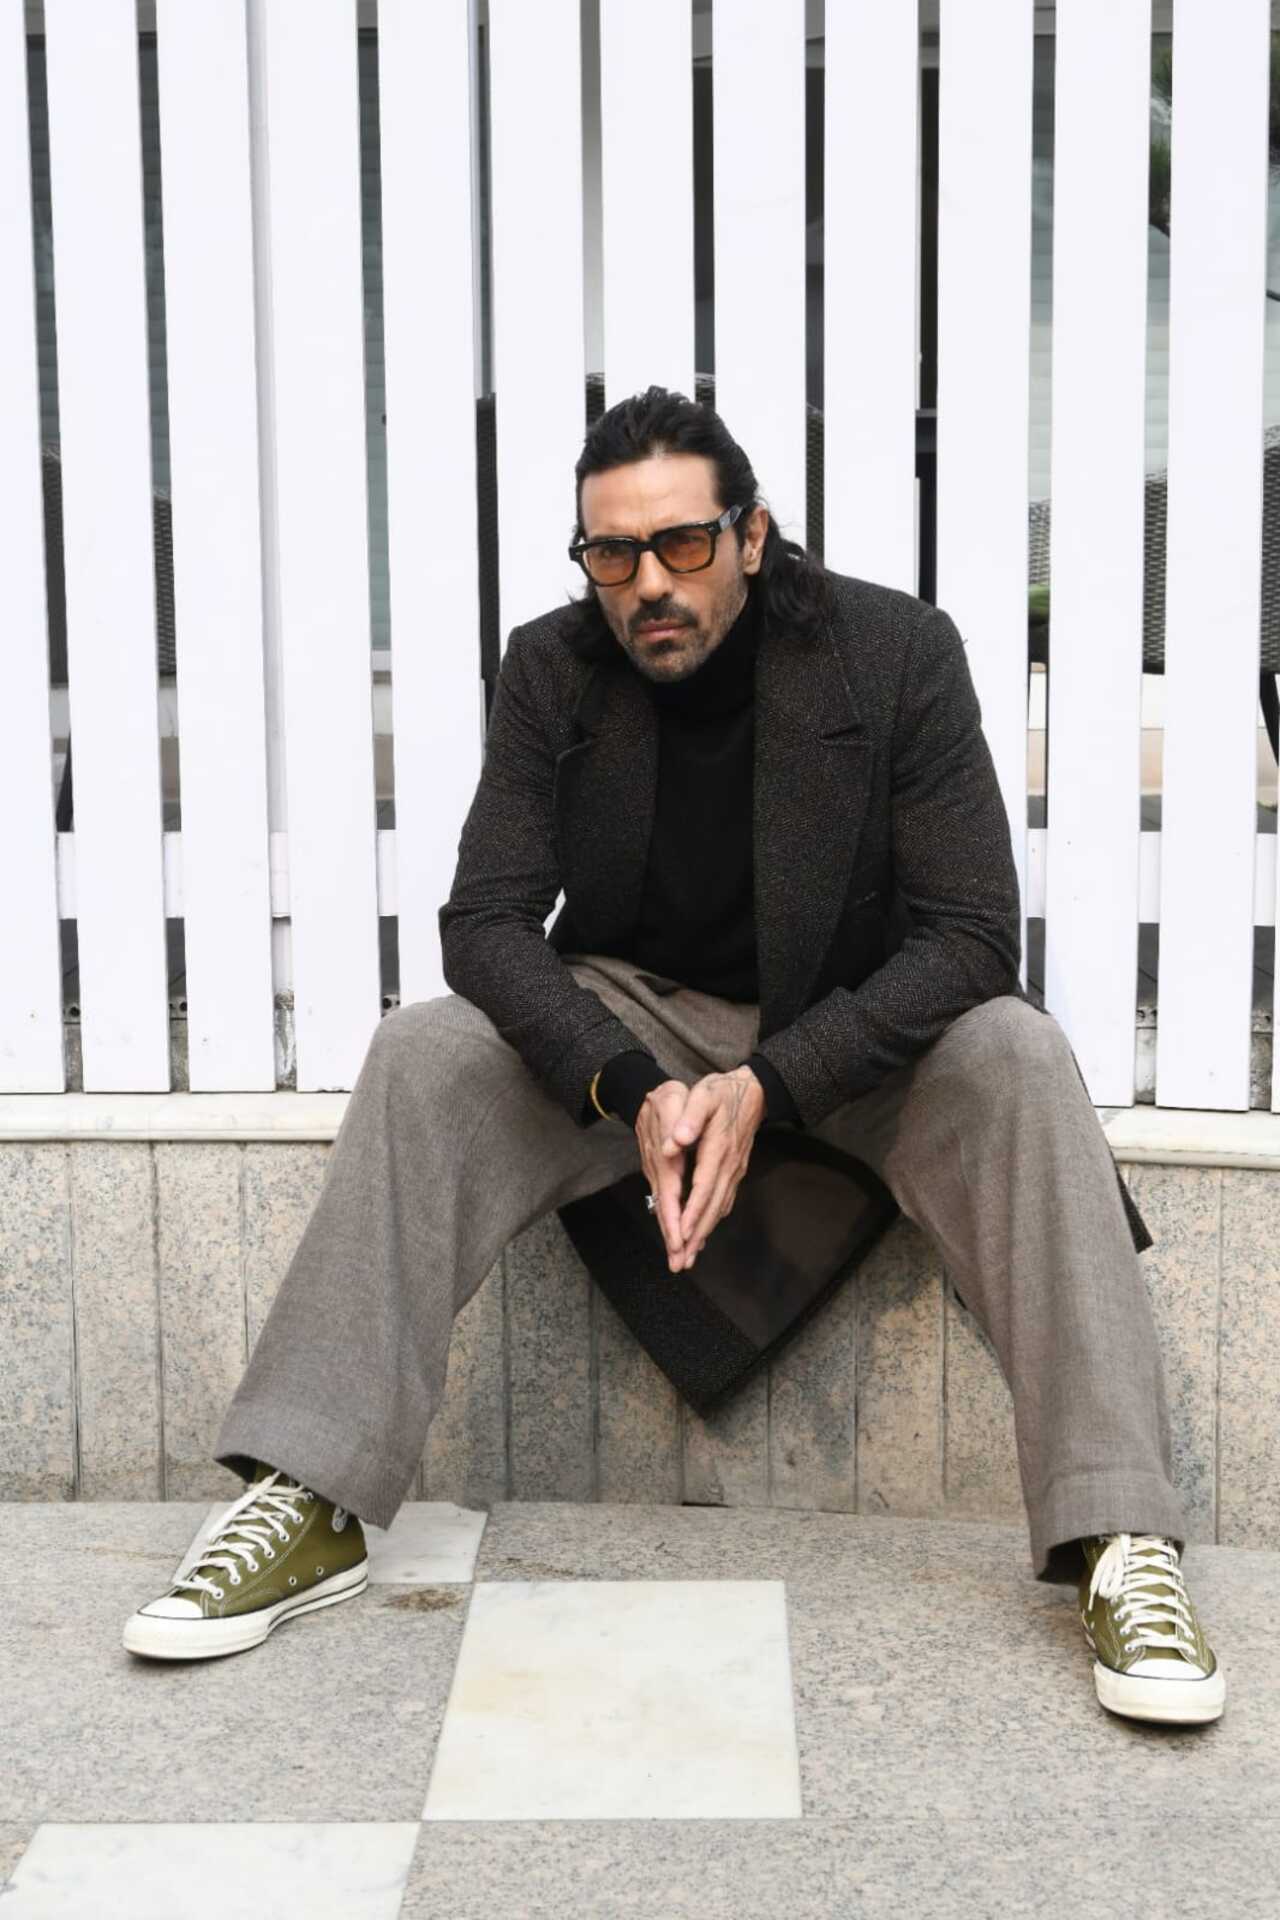 Arjun Rampal looked effortlessly stylish in this layered clothing for the promotions of his film